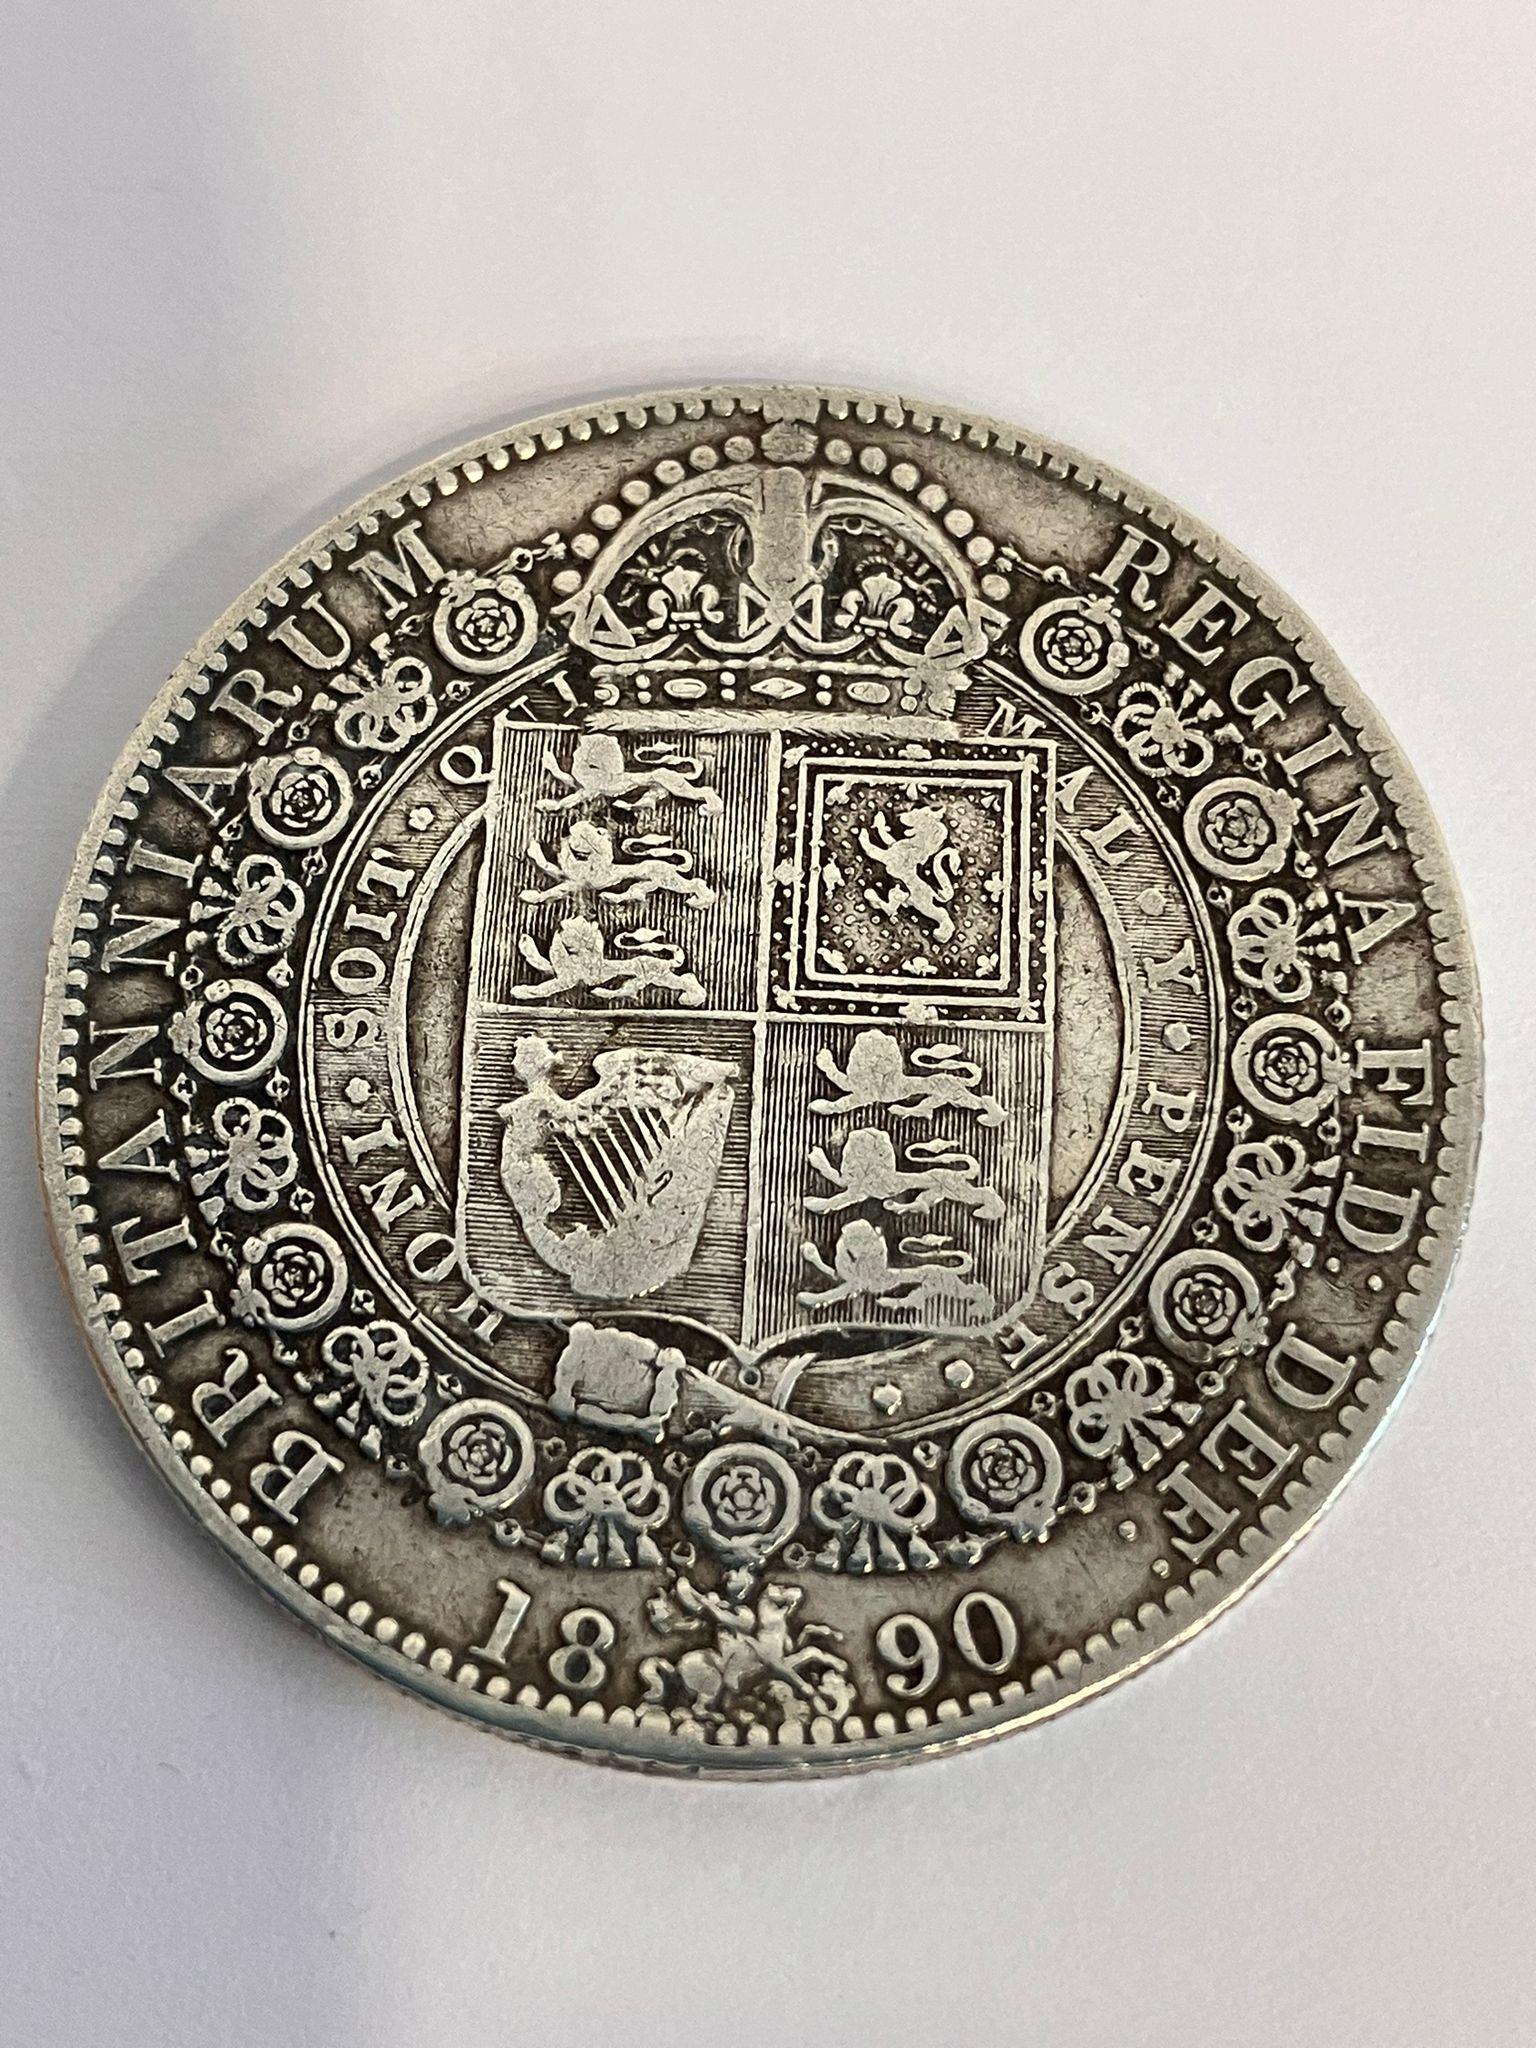 1890 SILVER HALF CROWN. Very fine condition. Having clear words and detail to both sides.